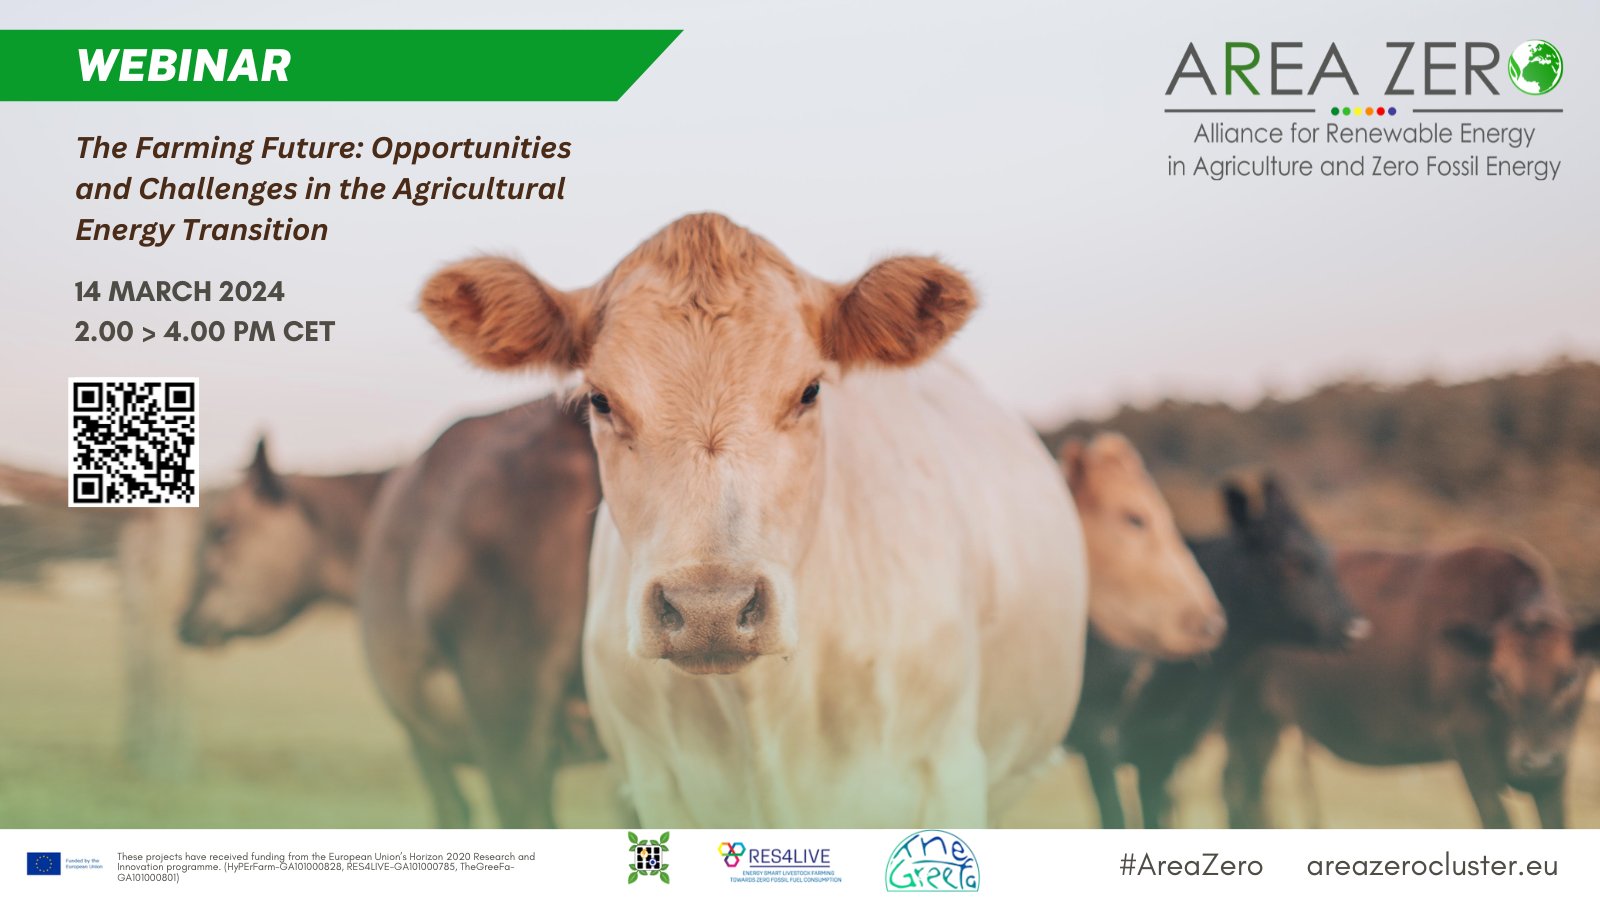 Webinar: The Farming Future: Opportunities and challenges in the agricultural energy transition.